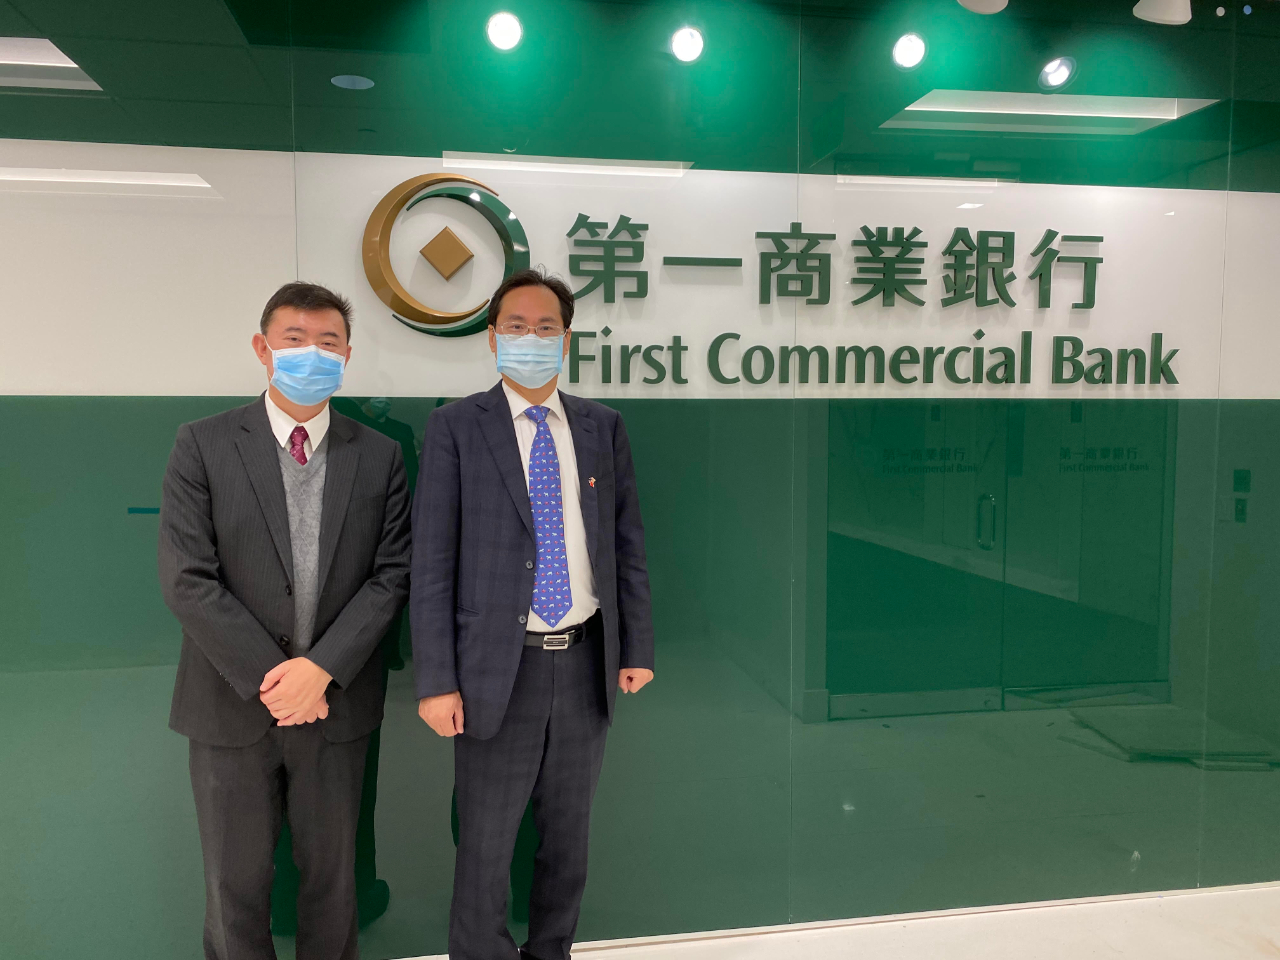 Director General Robert Lo visited the First Commercial Bank’s Houston Branch Office in Downtown Houston on January 7, 2021.

The Houston Office is the Taiwanese bank’s first branch in the Southern US and the grand opening is coming soon this year.